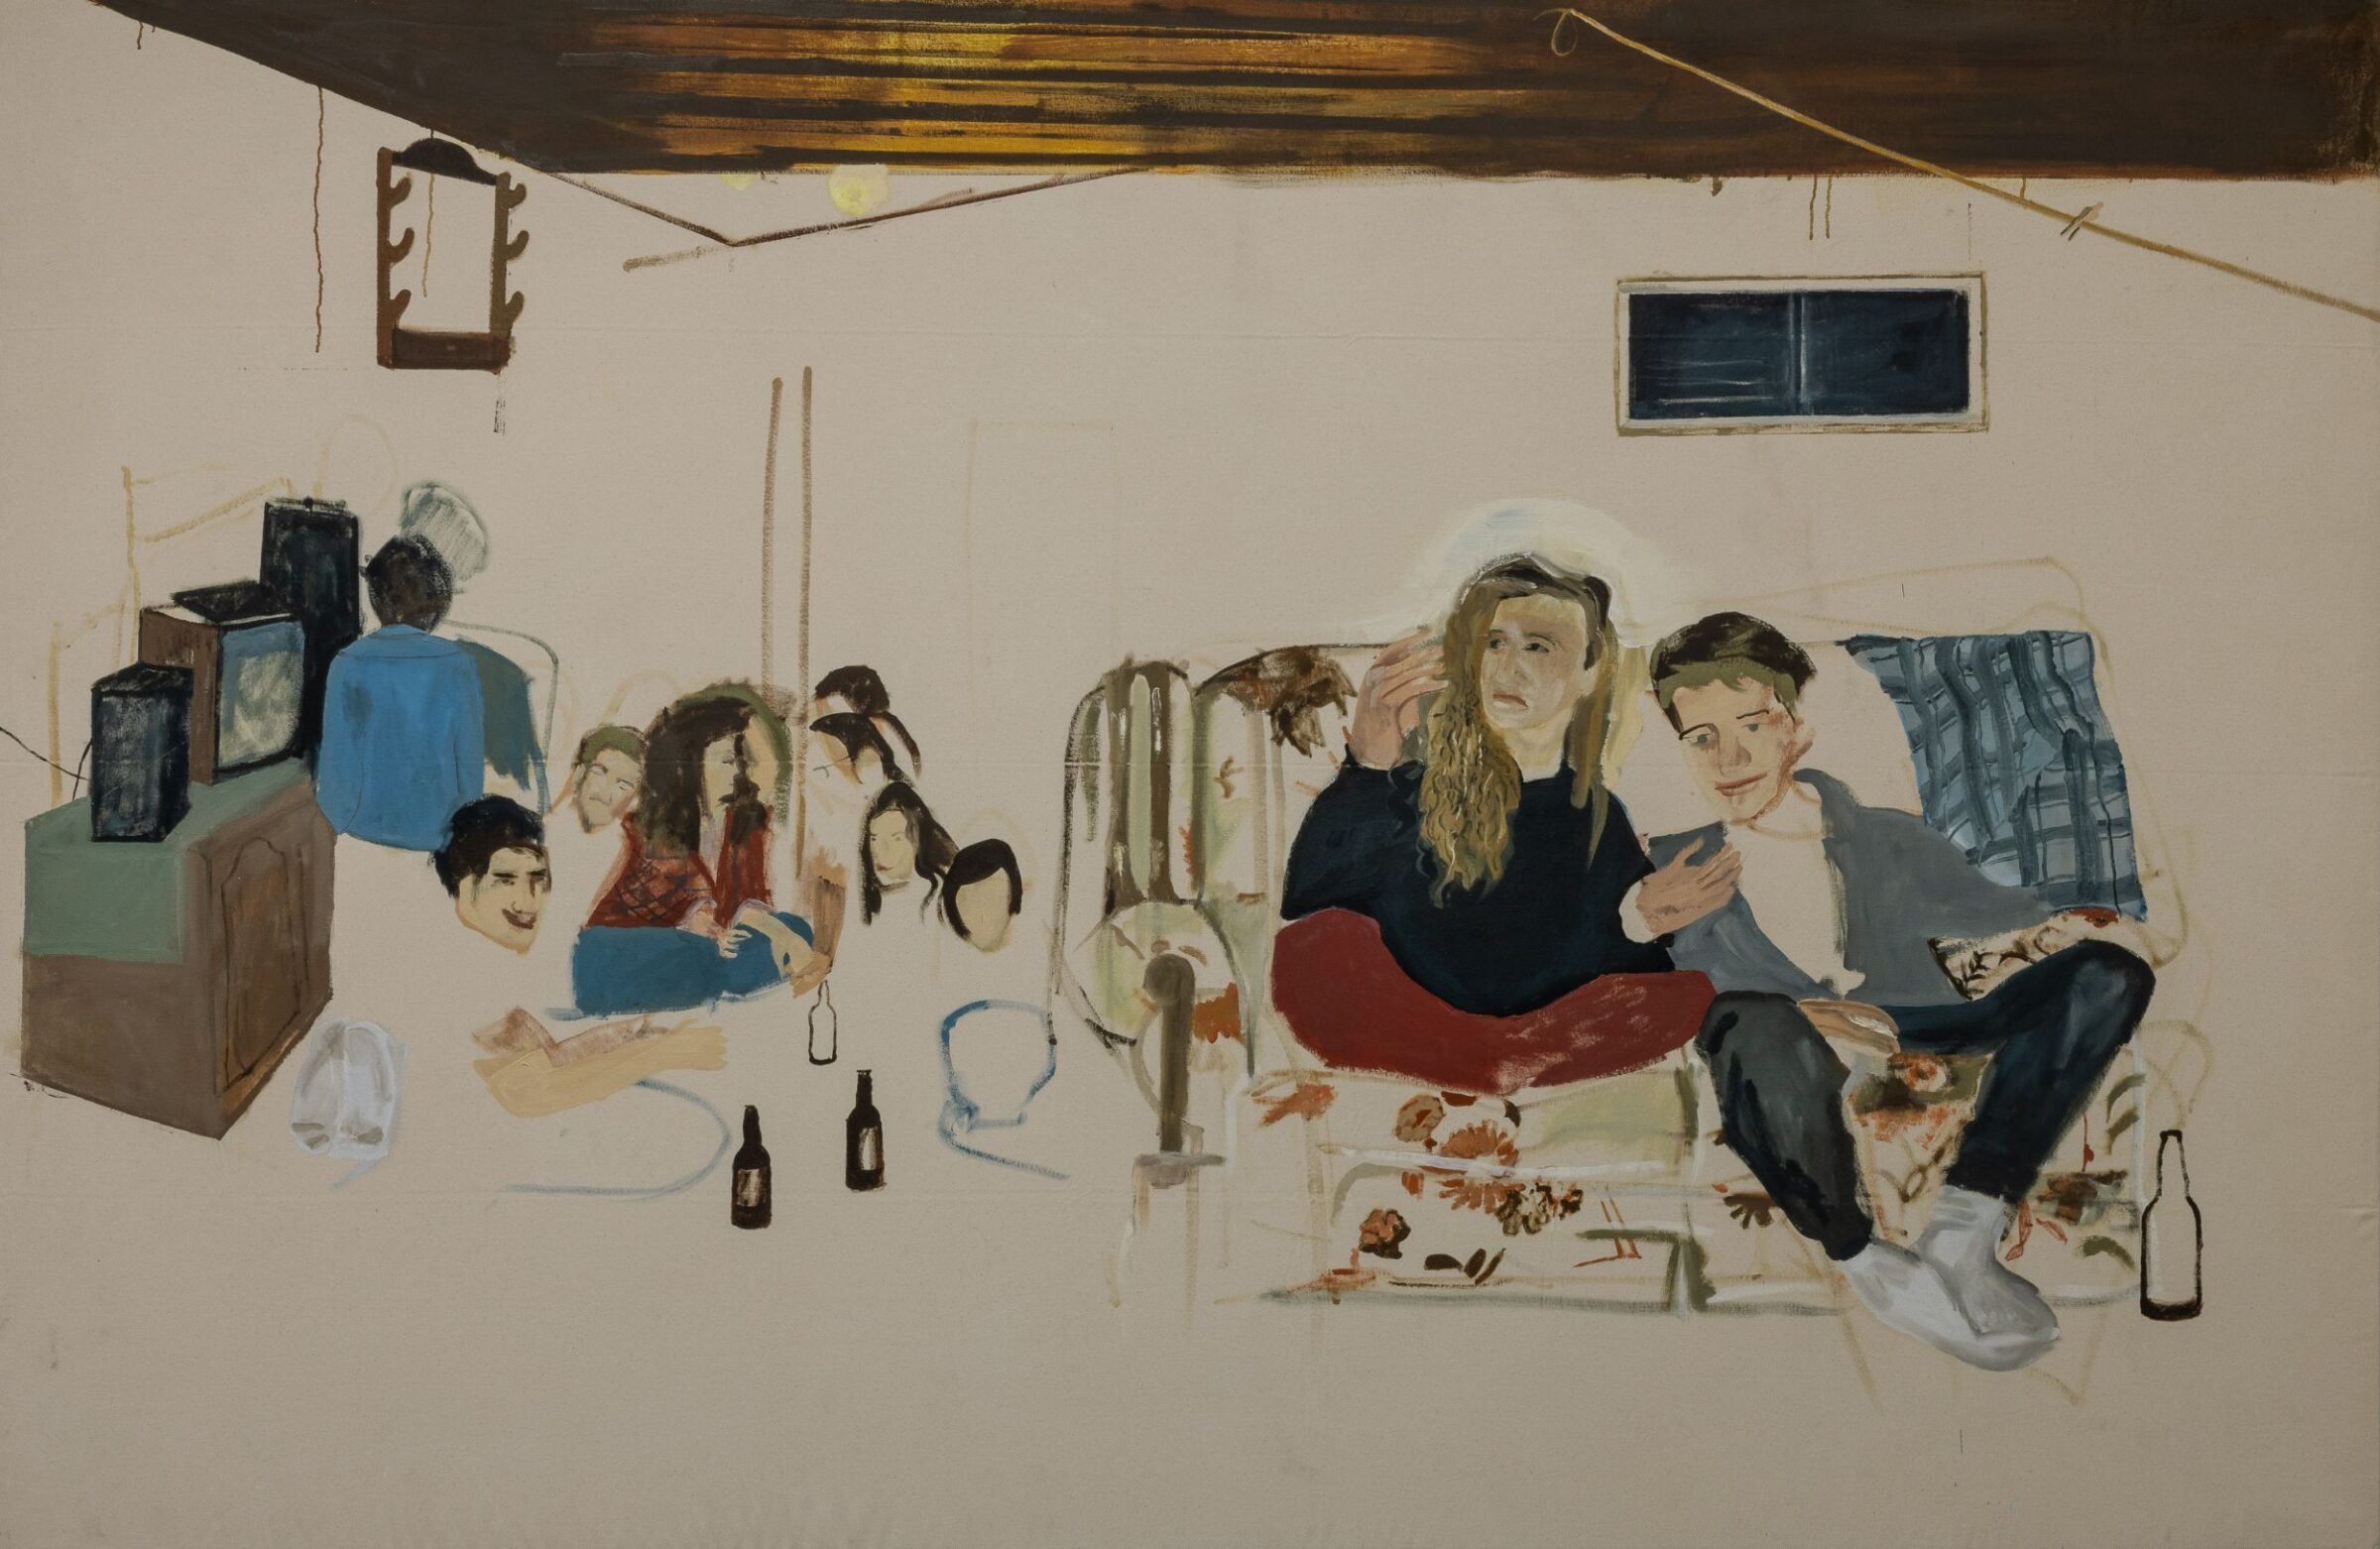 A group of teenagers in a sparsely decorated basement. Two figures sit arm-in-arm on a sofa. To the left of the seated figures are two beer bottles. There is no defined floor or wall.